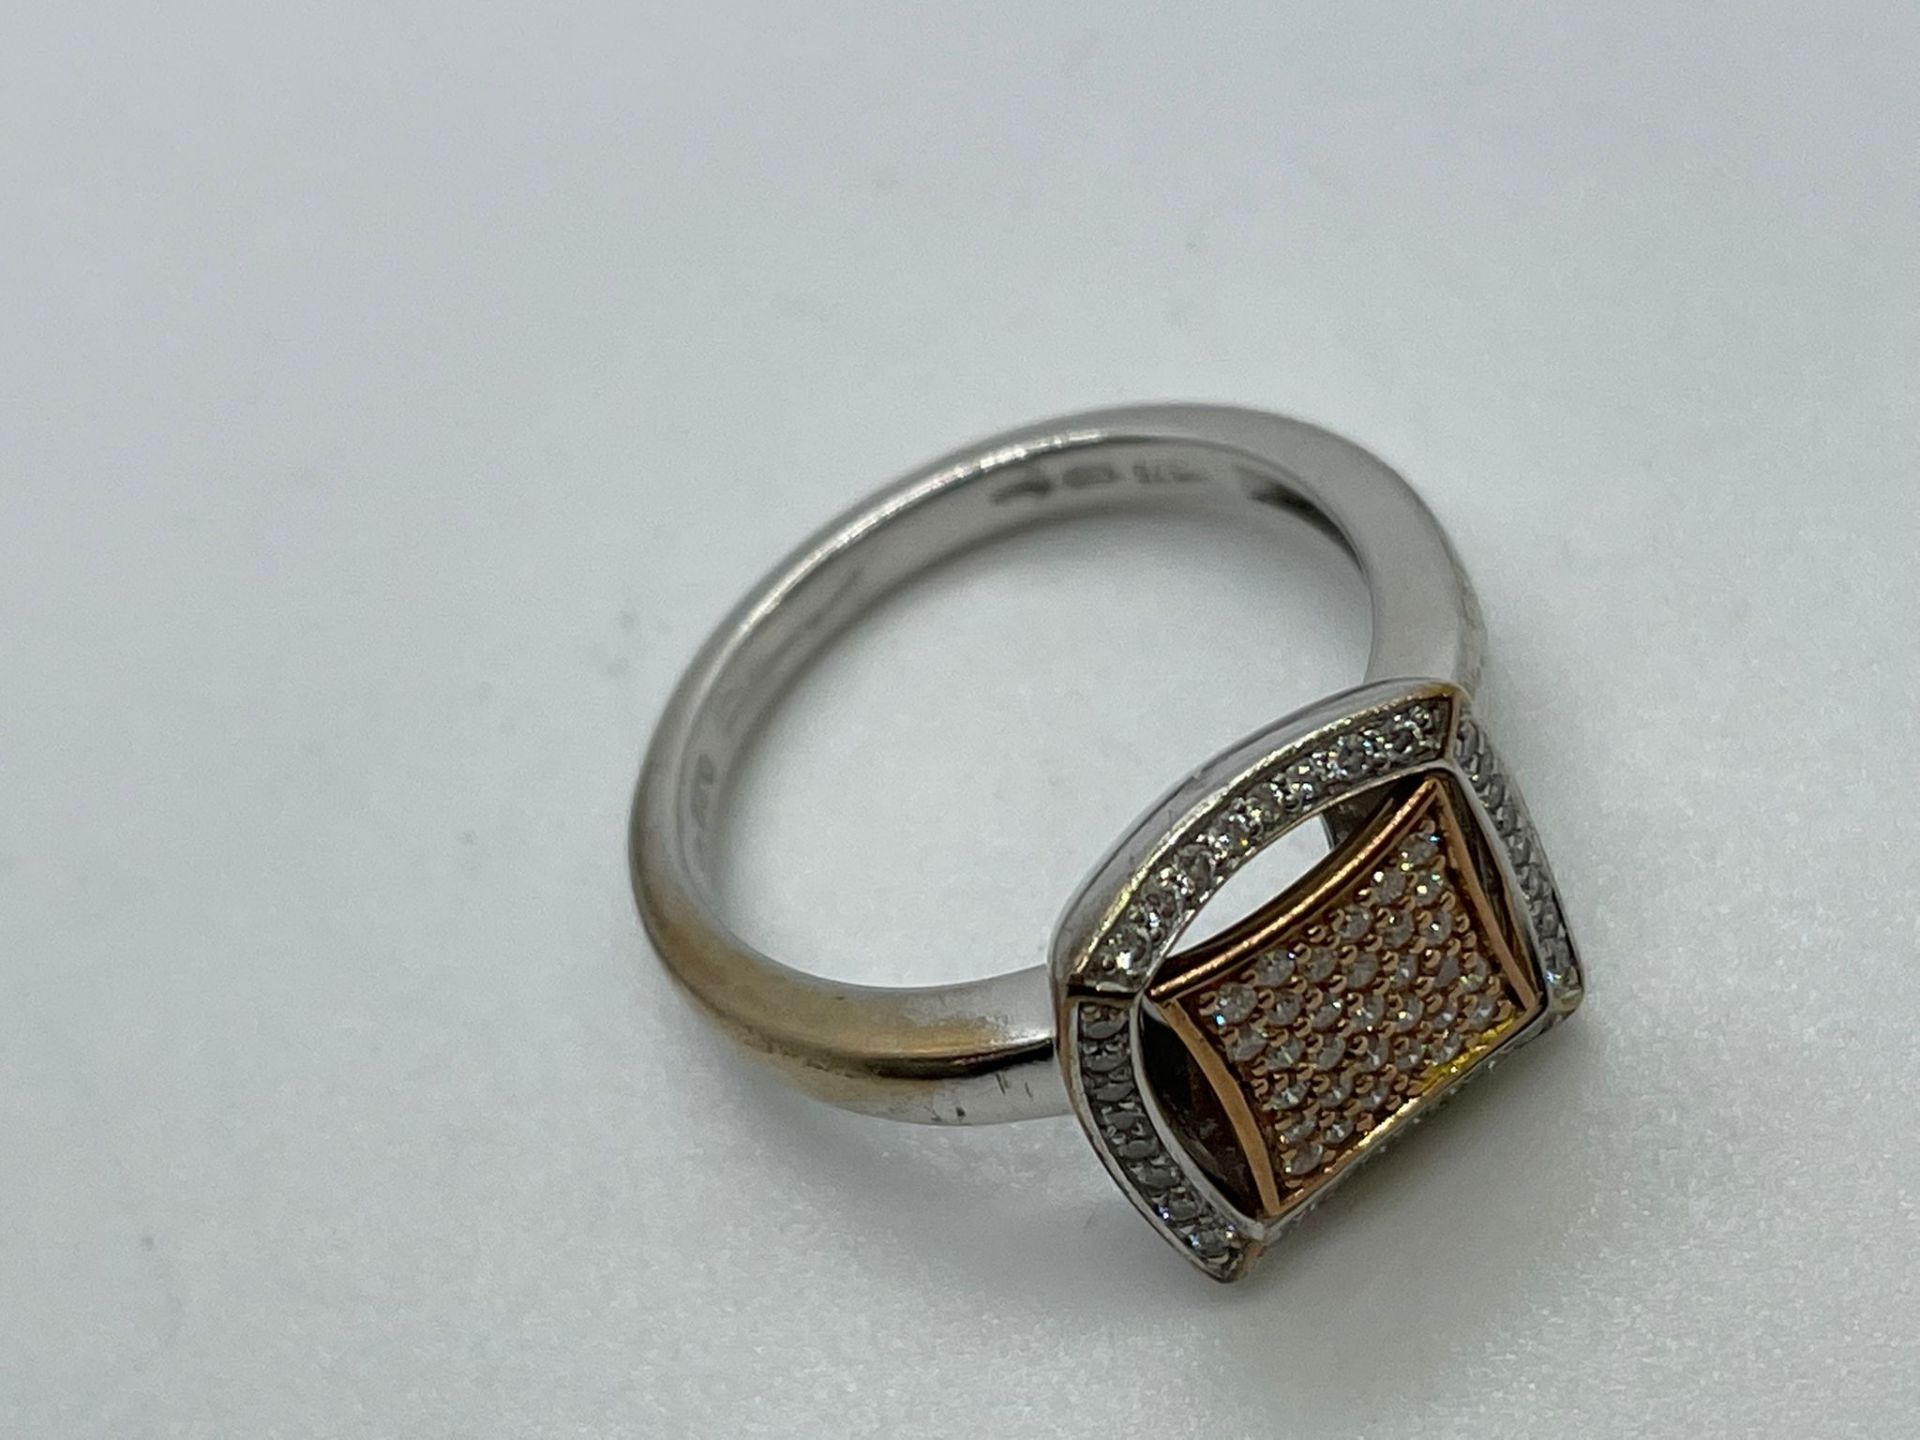 9ct white and rose gold diamond ring - Image 2 of 3